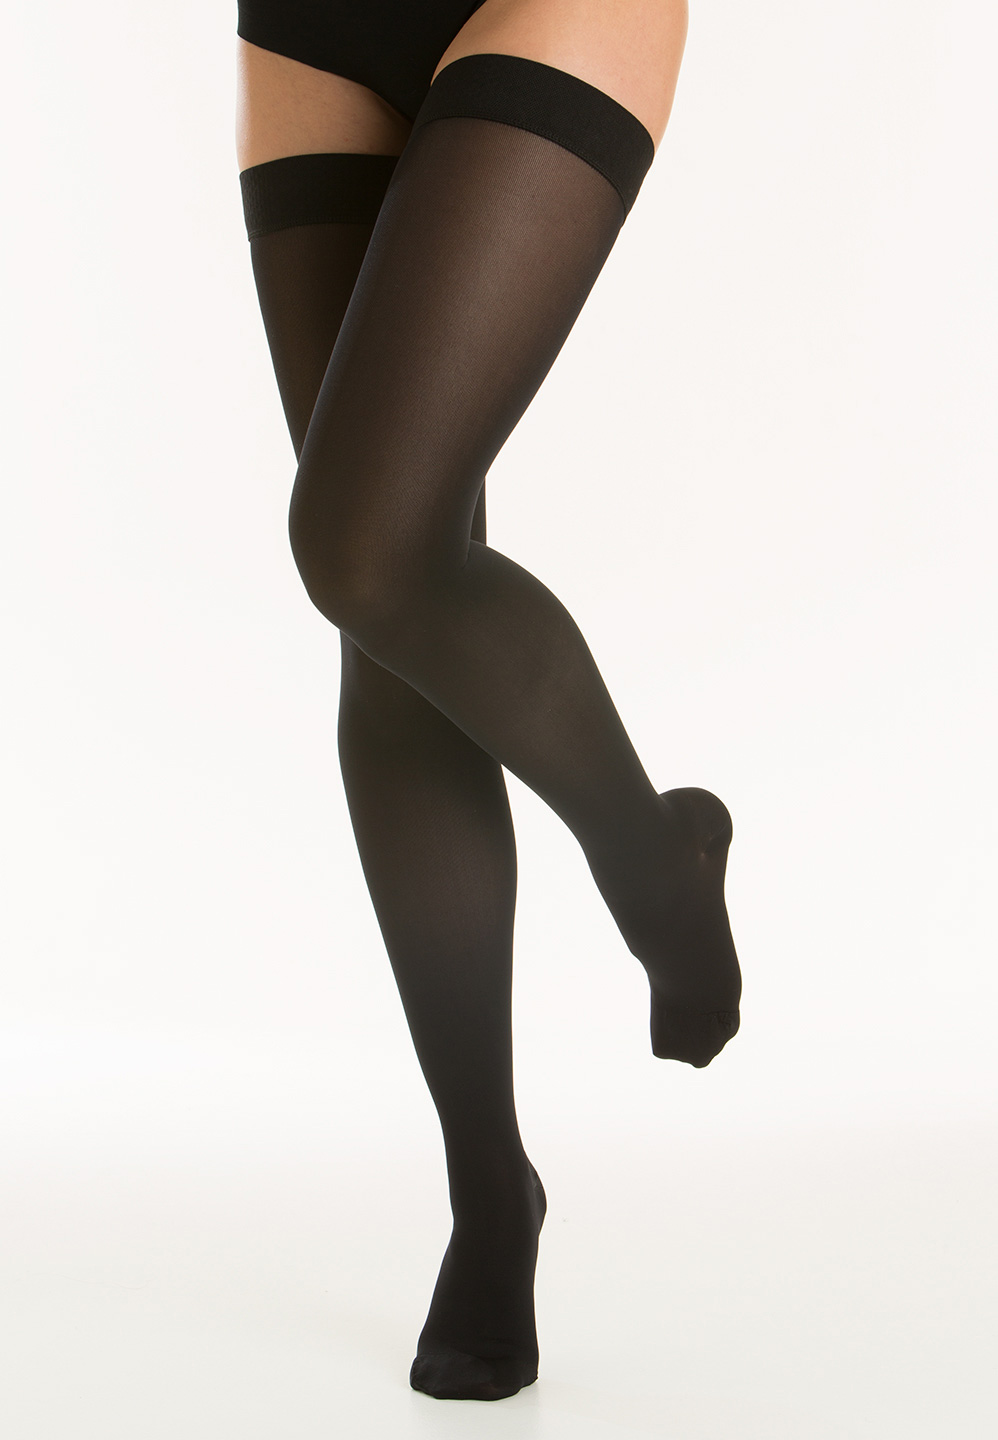 100% Made in Italy 20-30 mmHg Class 2 Relaxsan M2150 Soft fibre medical compression knee high socks 